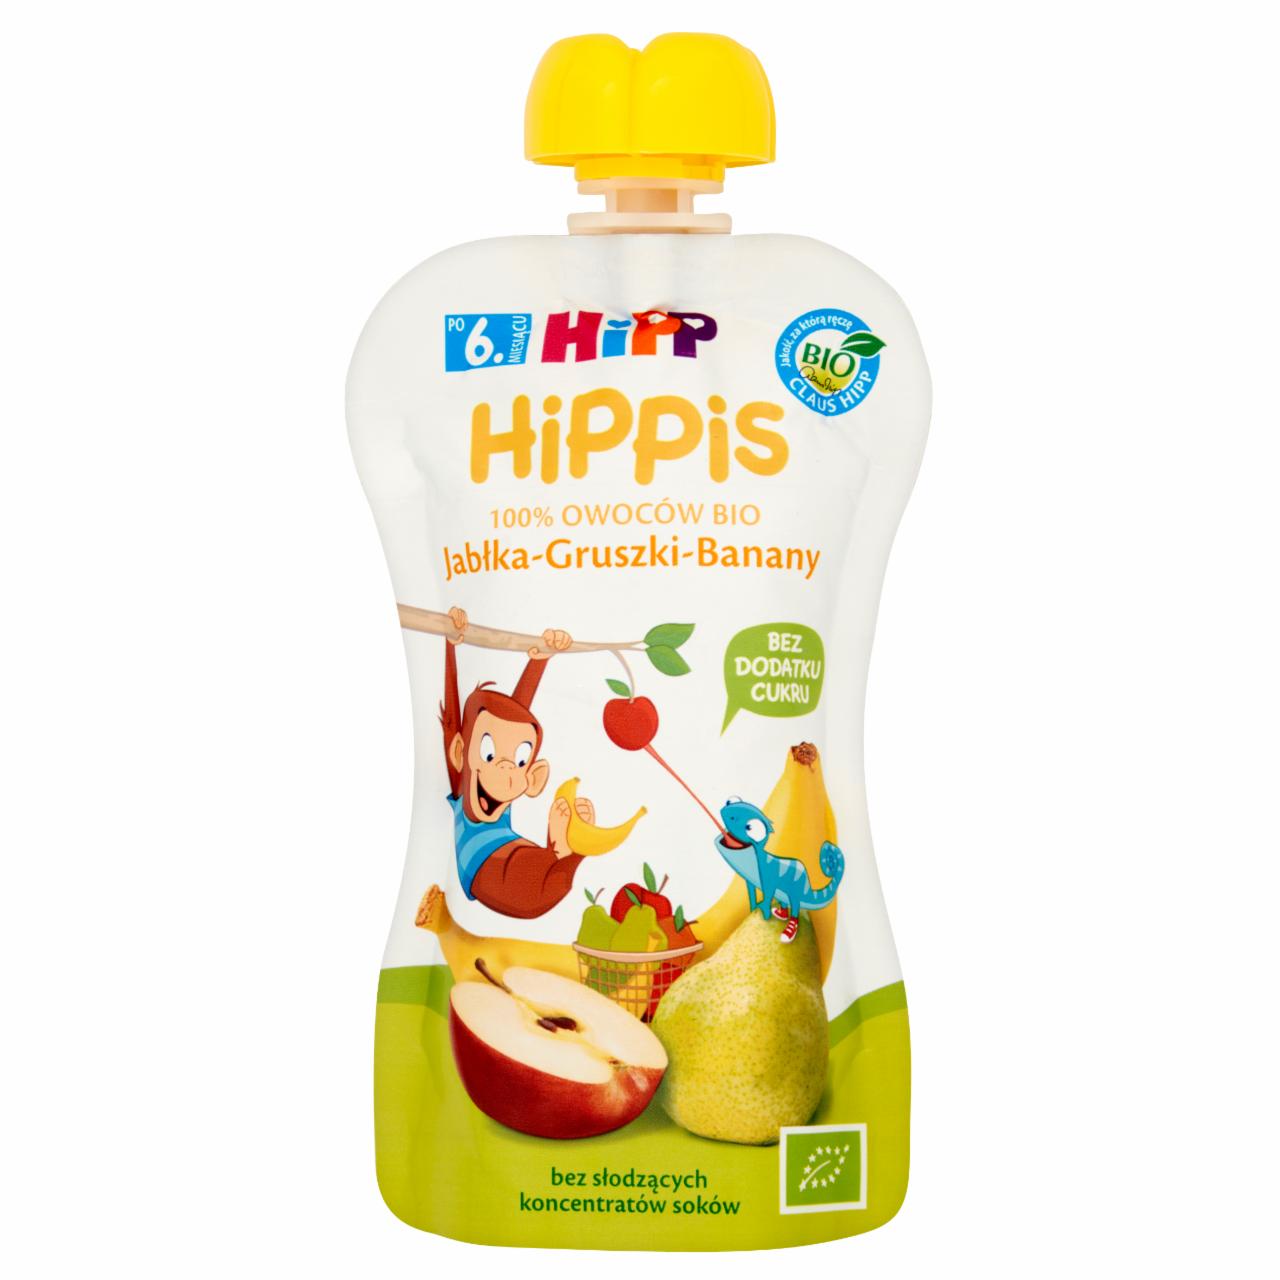 Photo - HiPP BIO Apples-Pears-Bananas Fruit Mousse after 6. Month Onwards 100 g